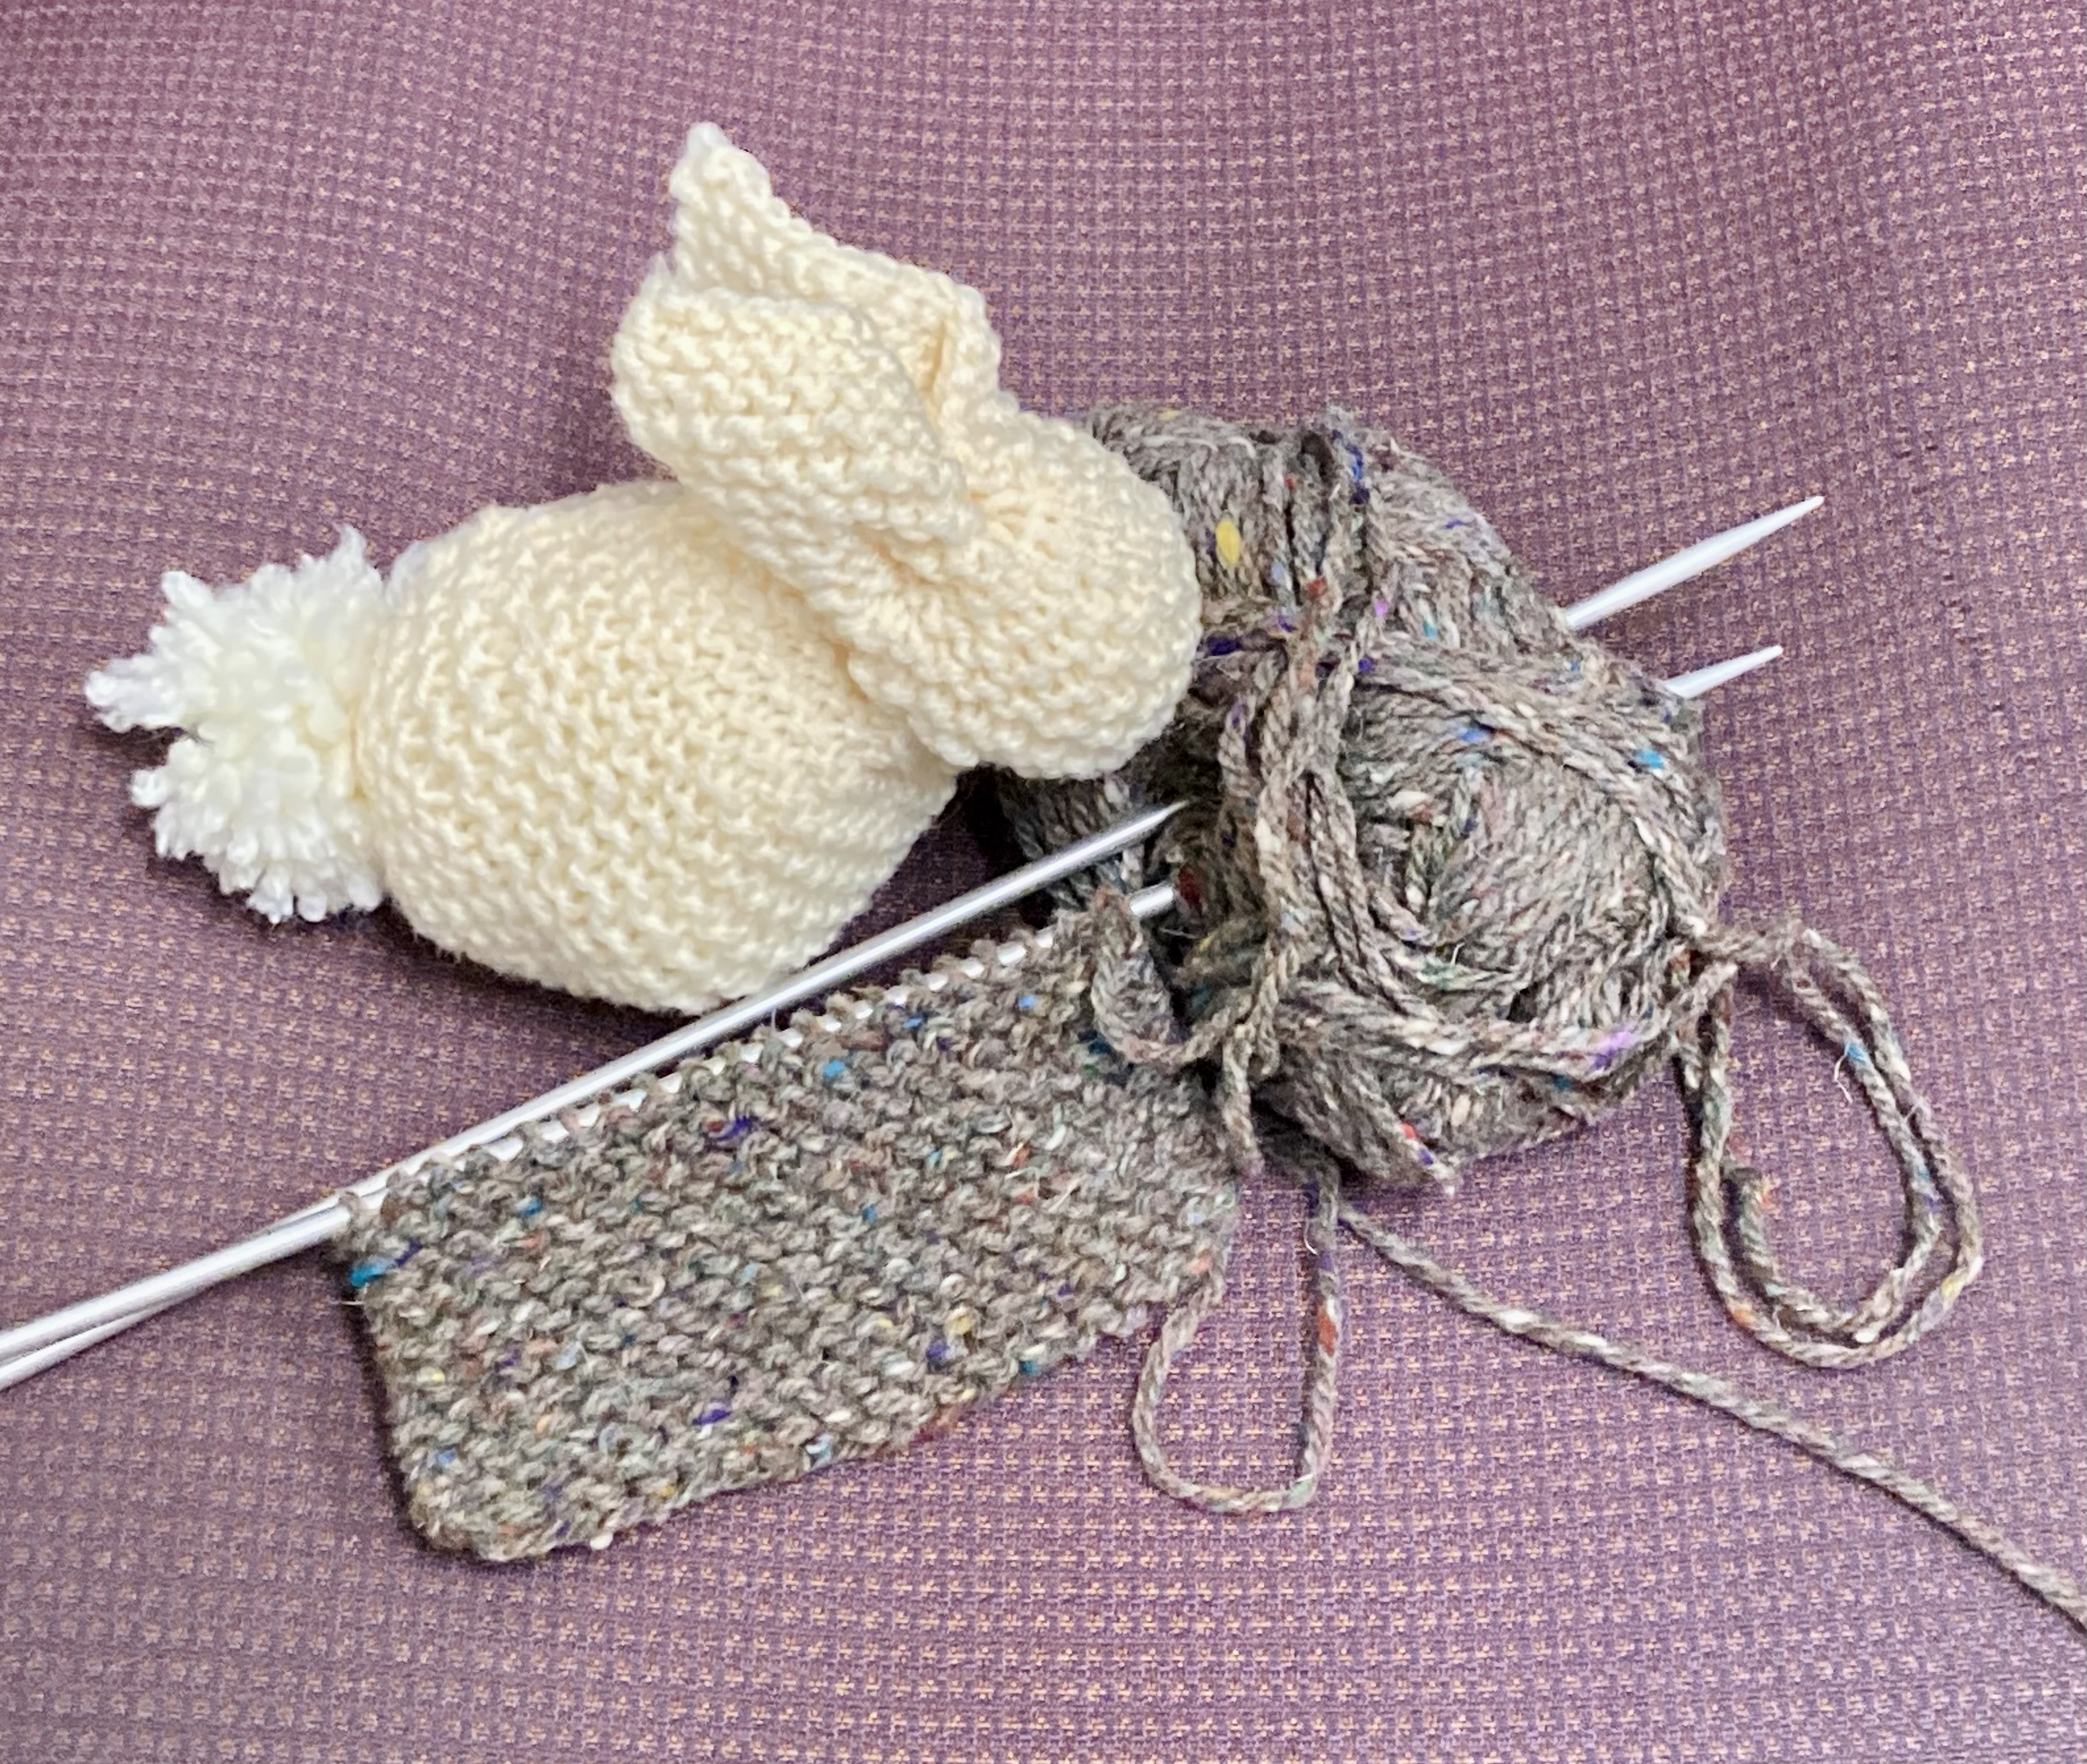 Cream colored knit bunny sits next to a project on knitting needles stabbed into gray yarn.